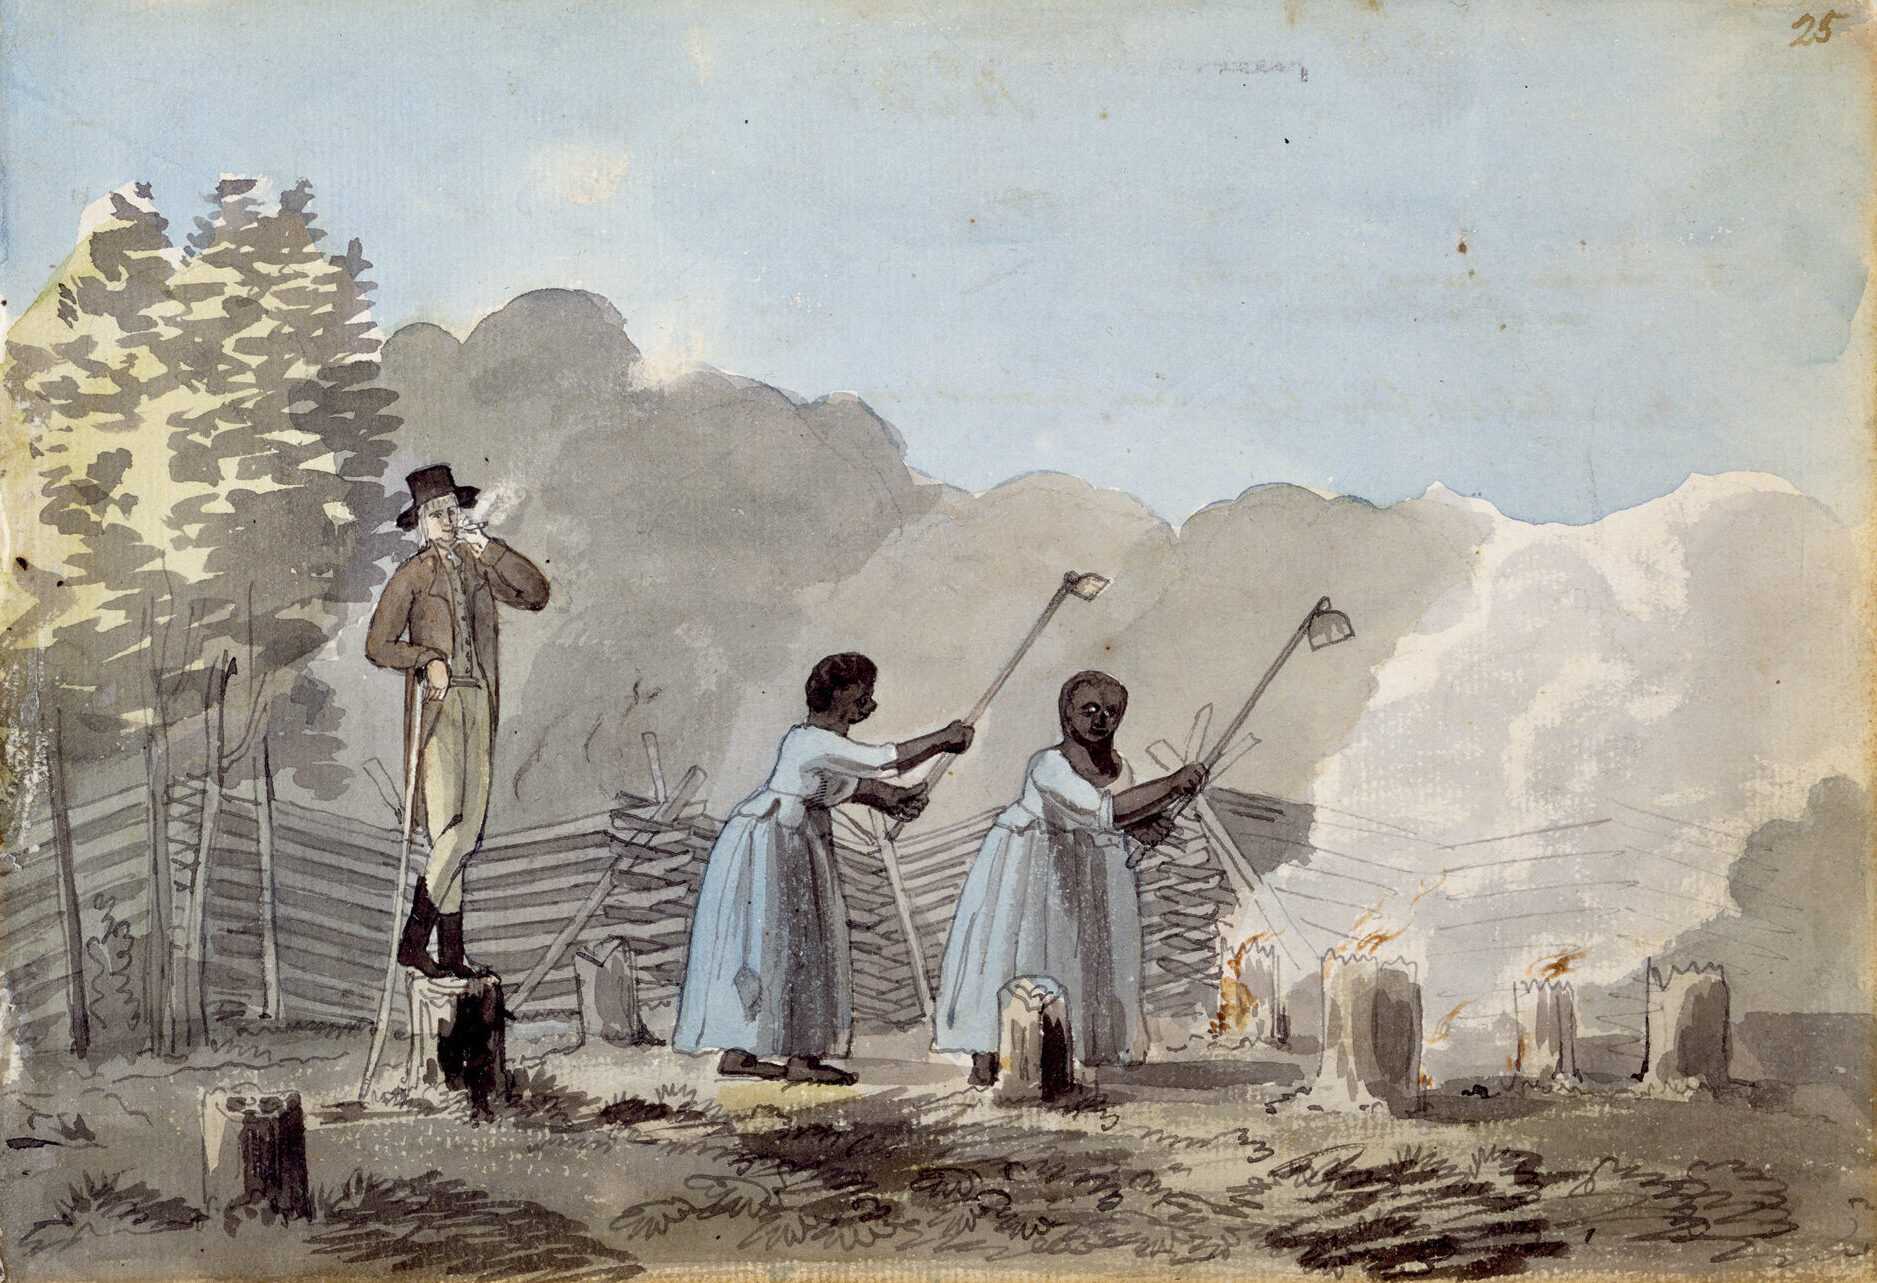 Painting of a white overseer watching enslaved women work in the field